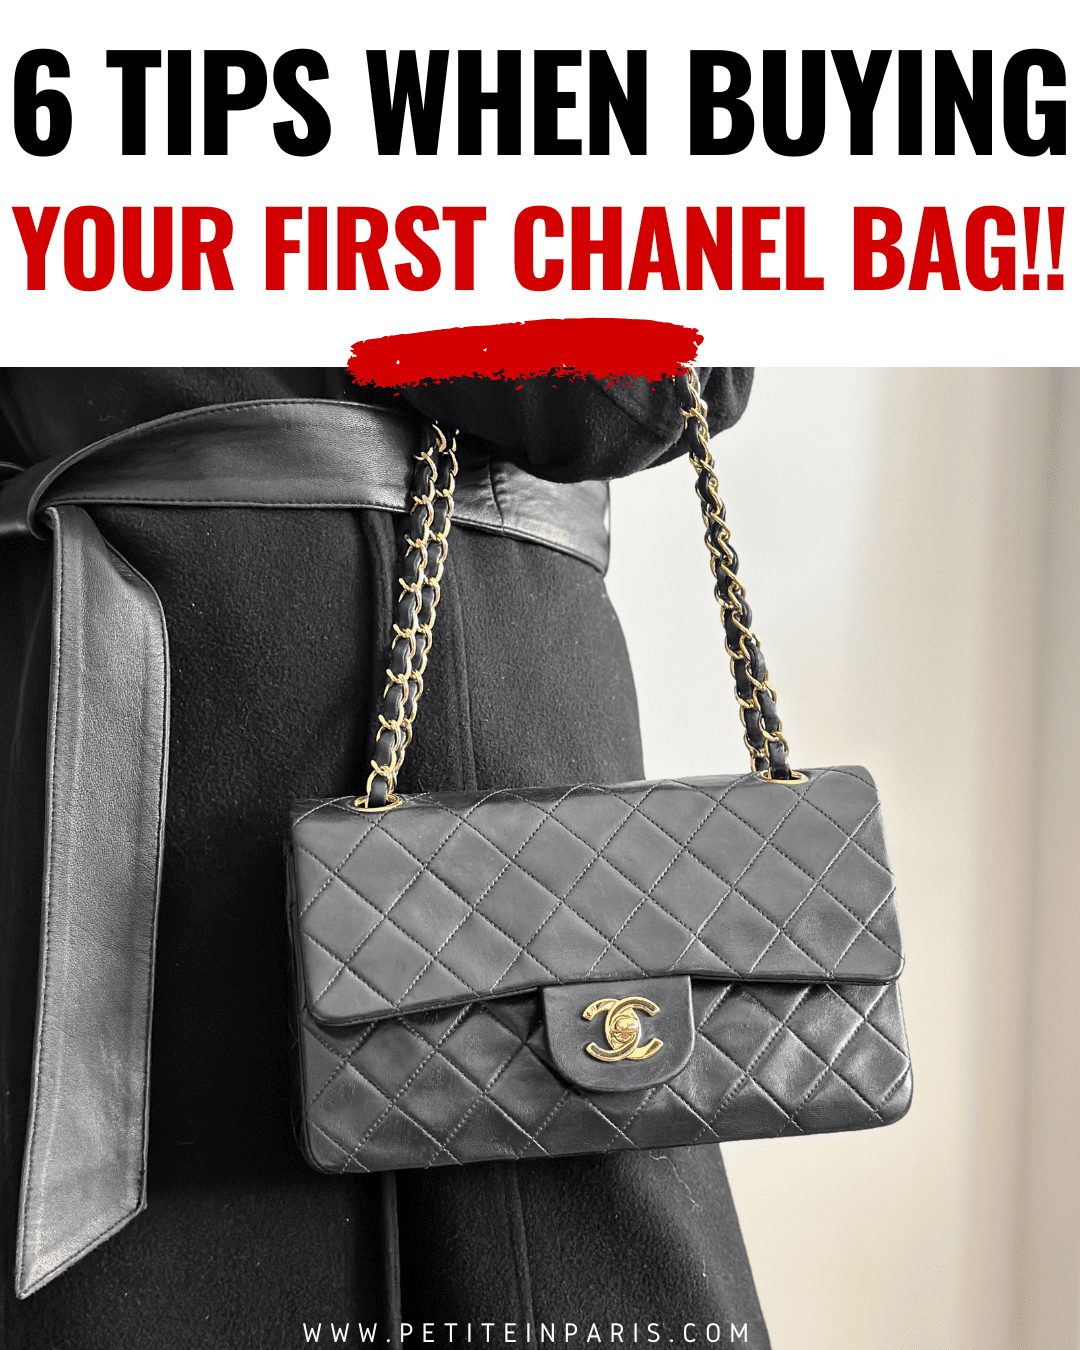 6 Tips when buying your first chanel handbag